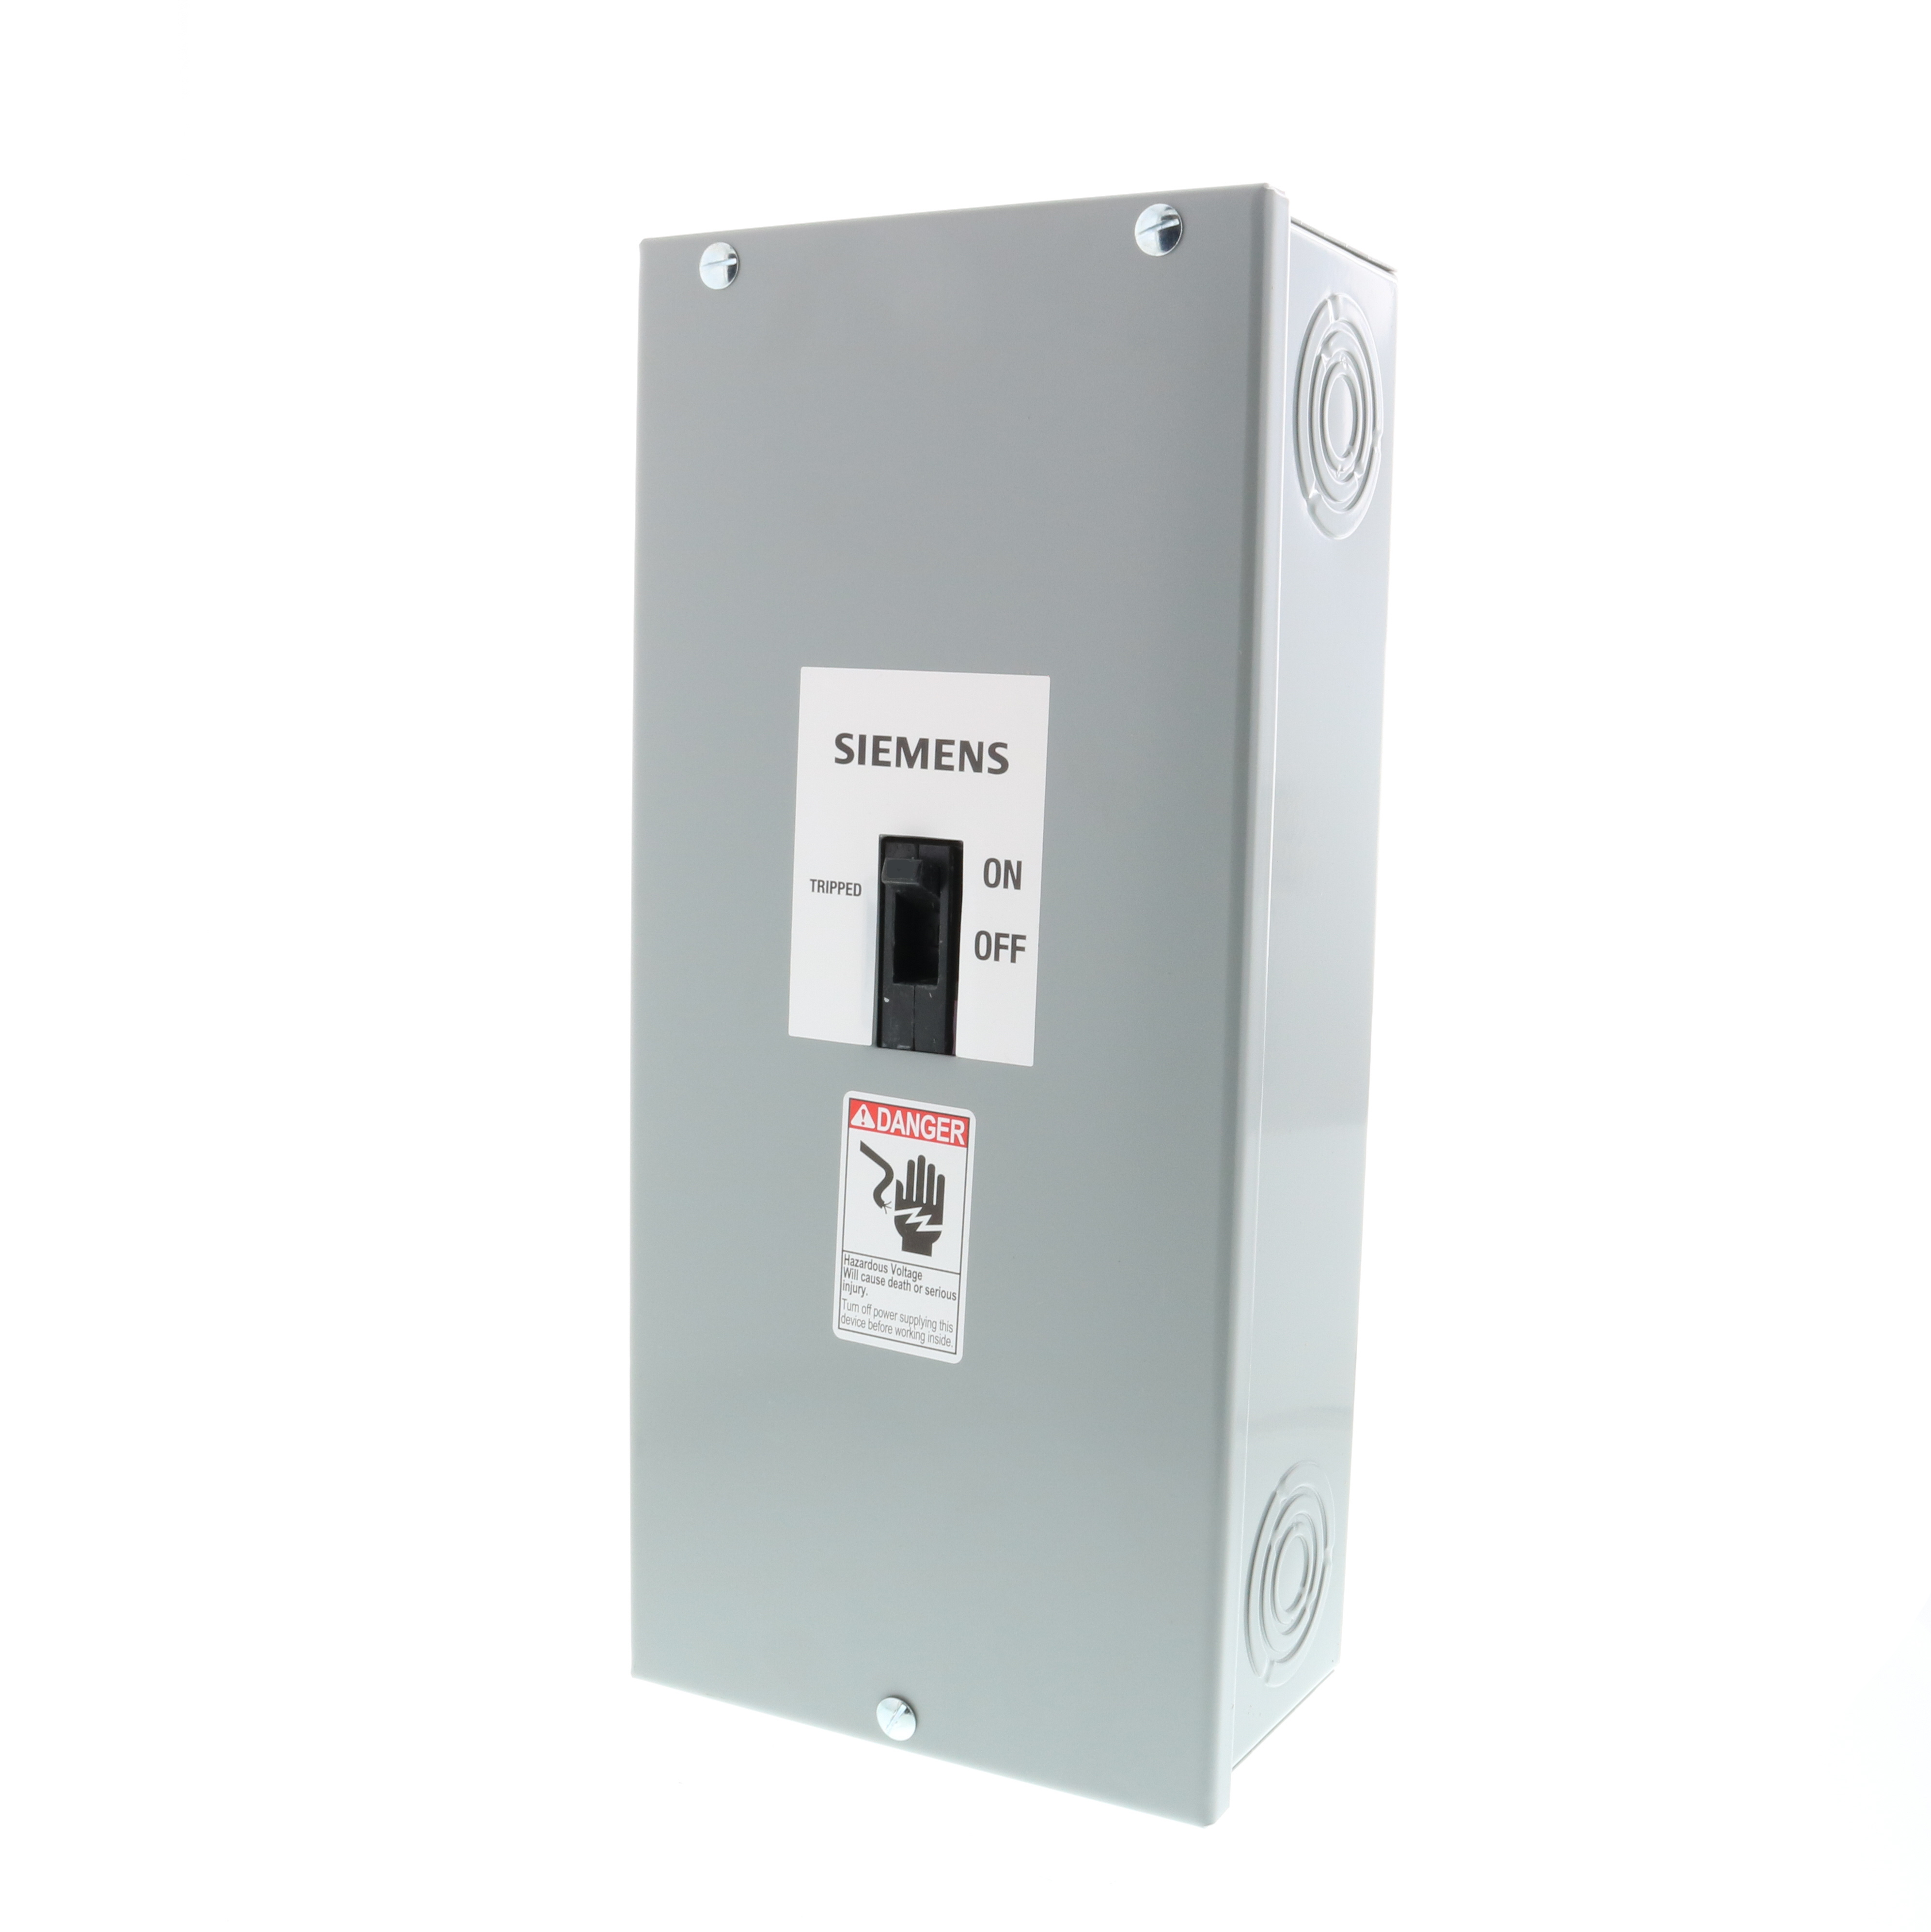 SIEMENS LOW VOLTAGE ENCLOSED SENTRON MOLDED CASE CIRCUIT BREAKER (ASSEMBLED) WITH THERMAL - MAGNETIC TRIP UNIT. 25A 2-POLE 240V STANDARD 40 DEG C BREAKER ED FRAME WITH STANDARD BREAKING CAPACITY (ED22B025). NON-INTERCHANGEABLE TRIP UNIT. NEMA TYPE 1 ENCLOSURE SURFACE MOUNTED (E2N1S) WITH NEUTRAL (W53045). INCLUDES LINE AND LOAD SIDE LUGS (SA1E025) WIRE RANGE 14 - 10AWG (CU) / 12 - 10AWG (AL). ENCLOSURE DIMENSIONS (W x H x D) IN 7.50 x 16.72 x 5.06.